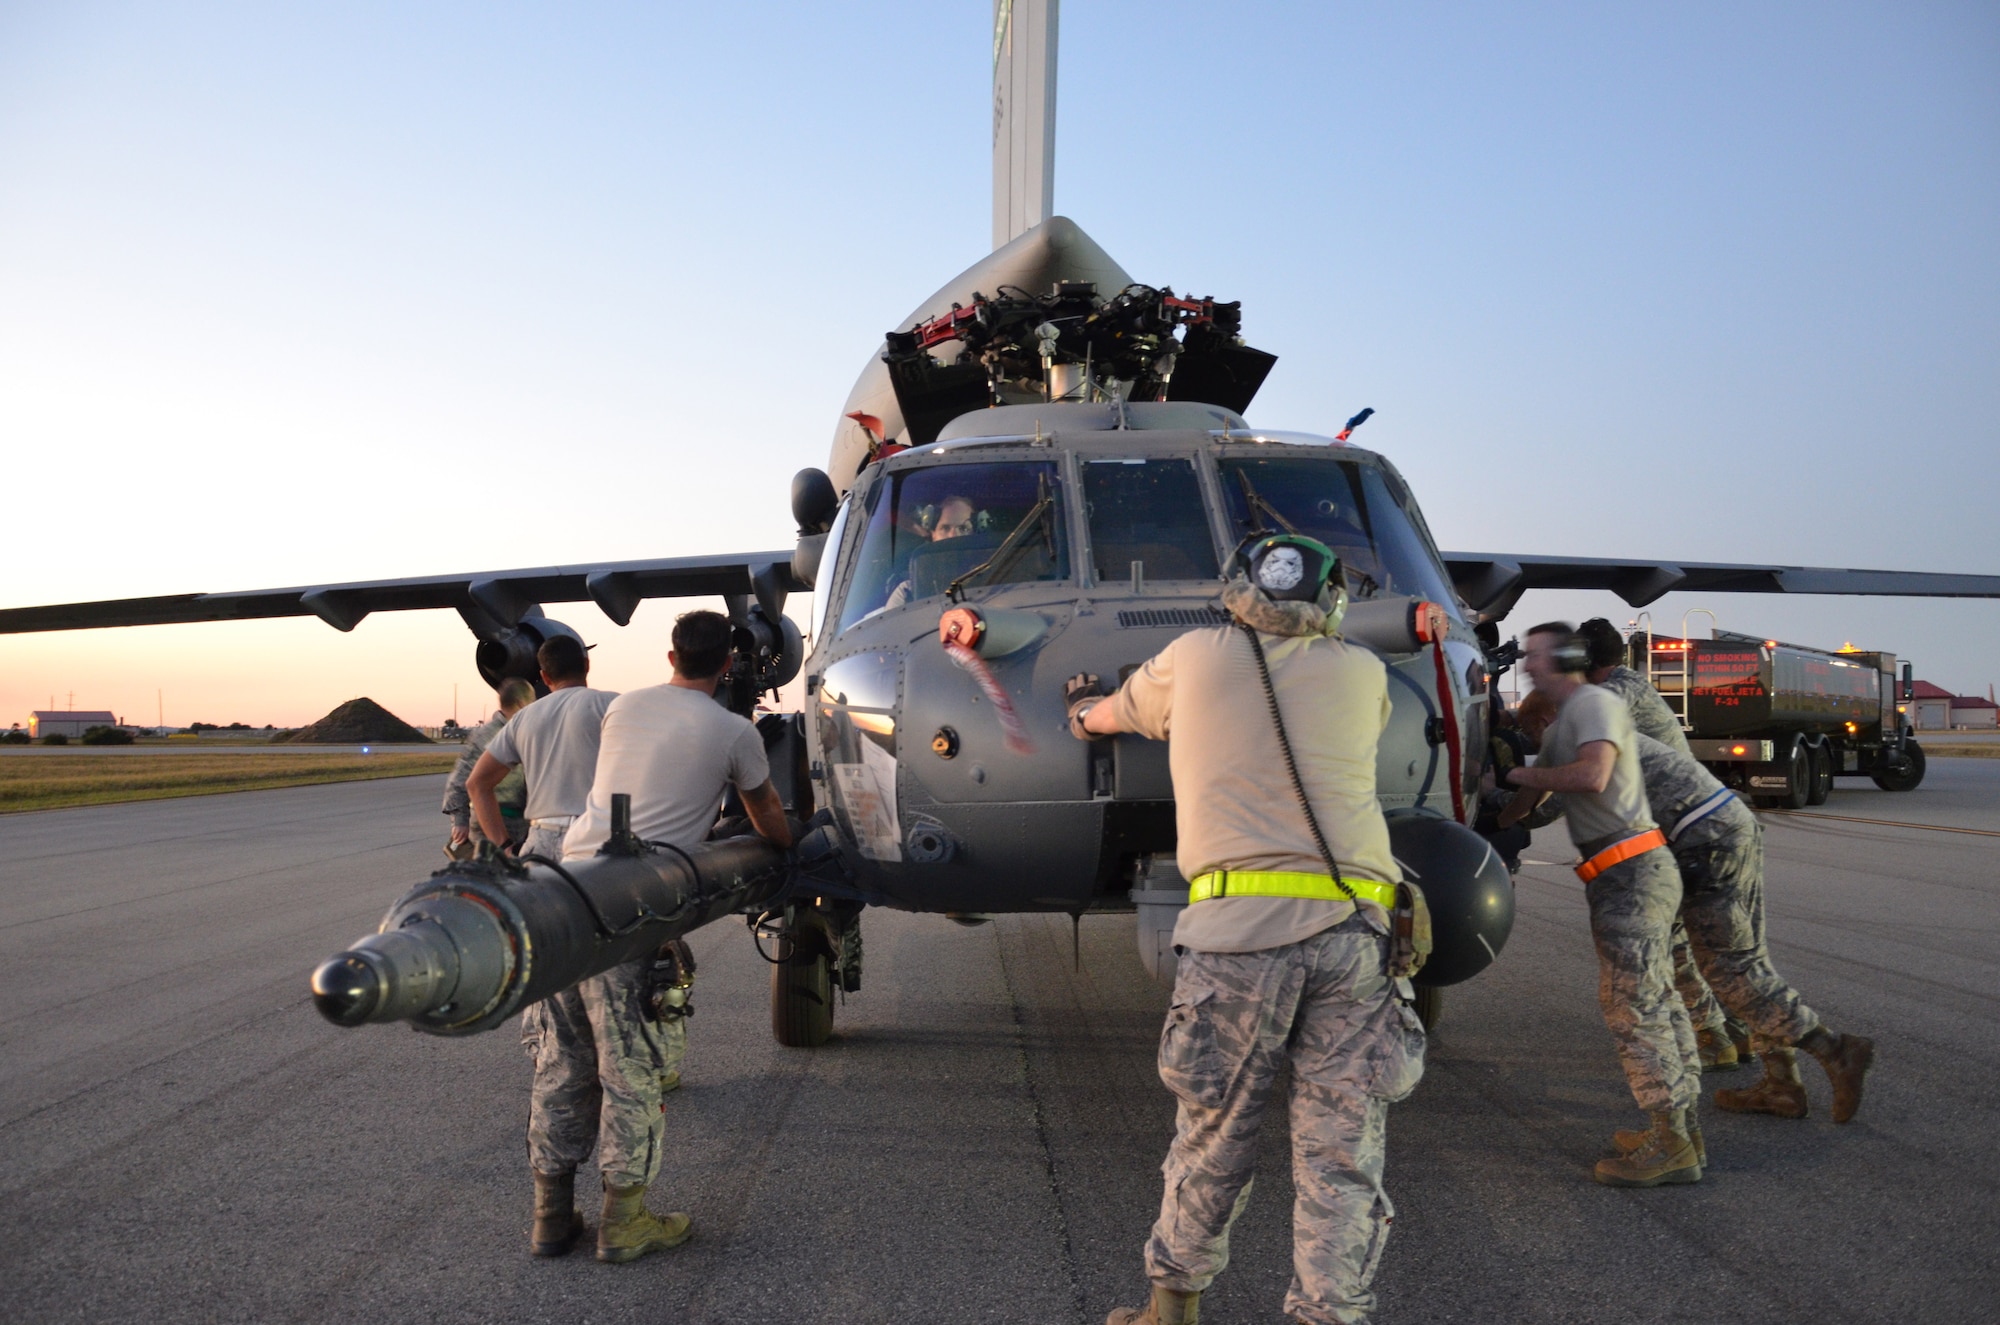 To ensure the flying safety of Air Force choppers used to save lives in combat, maintenance crews from the 920th Rescue Wing swap out an HH-60G Pave Hawk helicopter for reconditioning January 25, 2017. A team of 10 maintainers is necessary to skillfully muscle the metal warrior into the cargo bay however, more often join the unique event for hands-on training and to secure the warrior on a smooth journey over an ocean and a continent to trade places with the combat-weary aircraft. (U.S. Air Force photo/Maj. Cathleen Snow)
